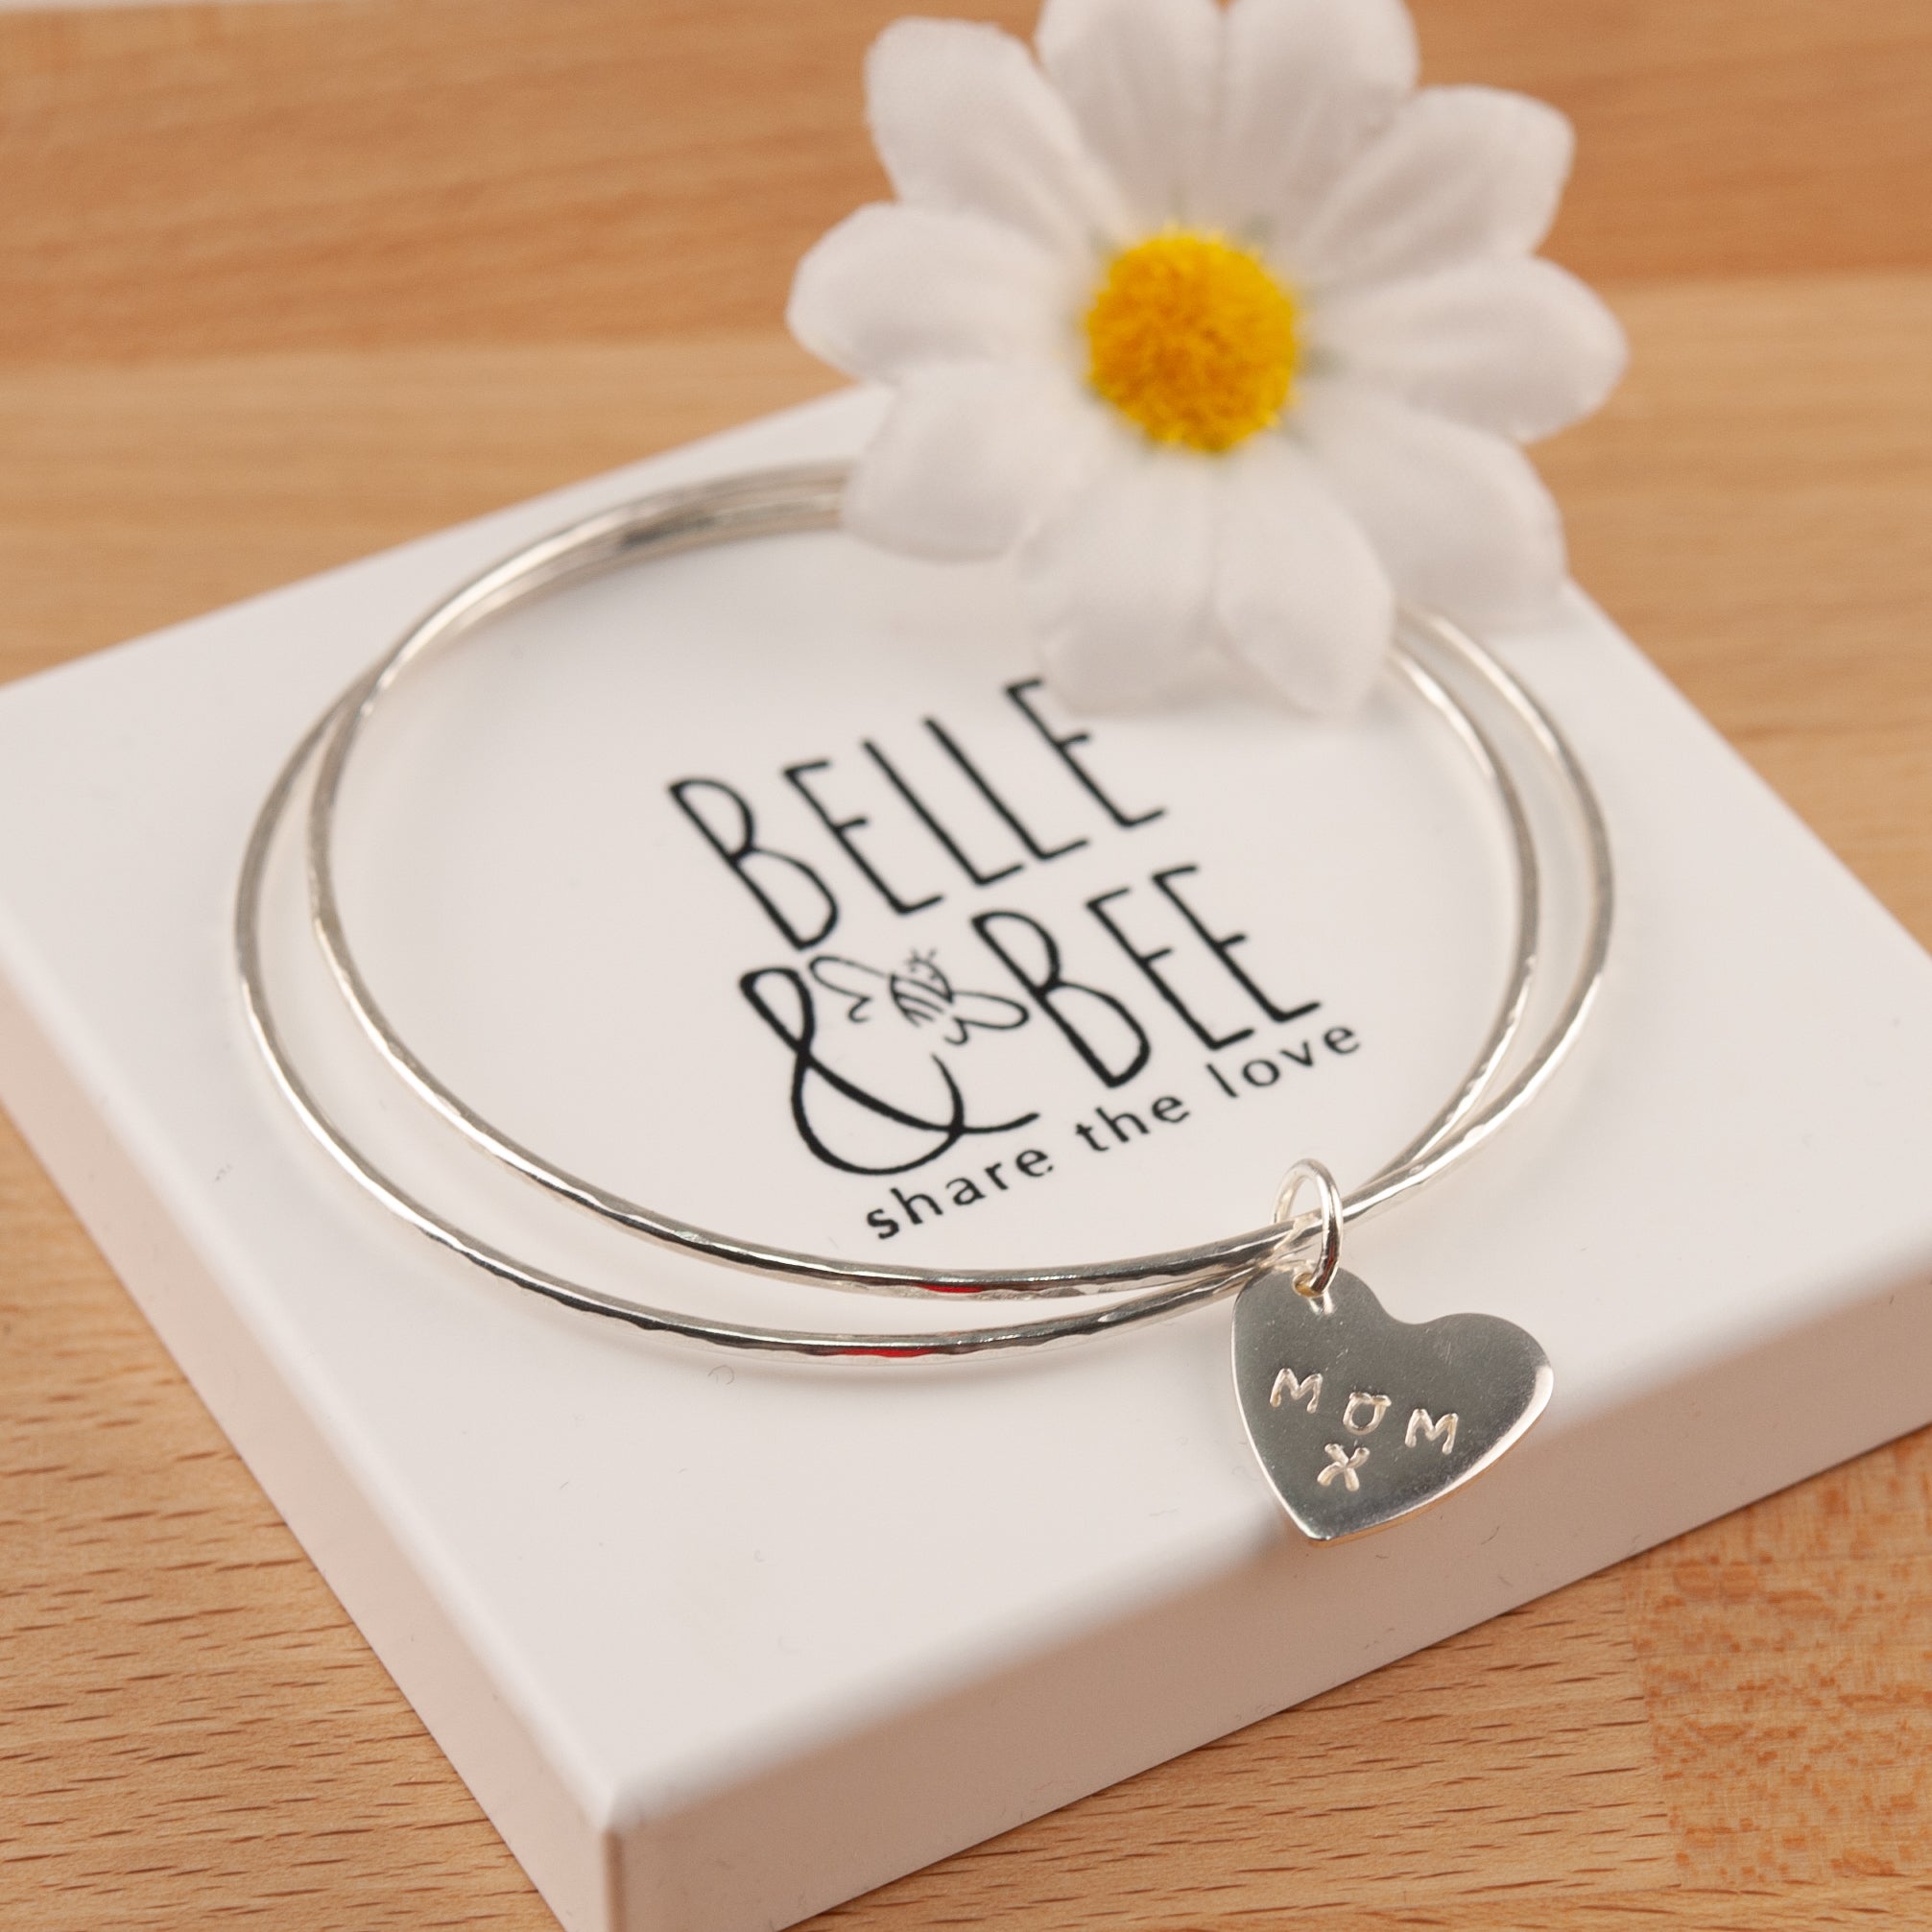 Belle & Bee sterling silver double bangle